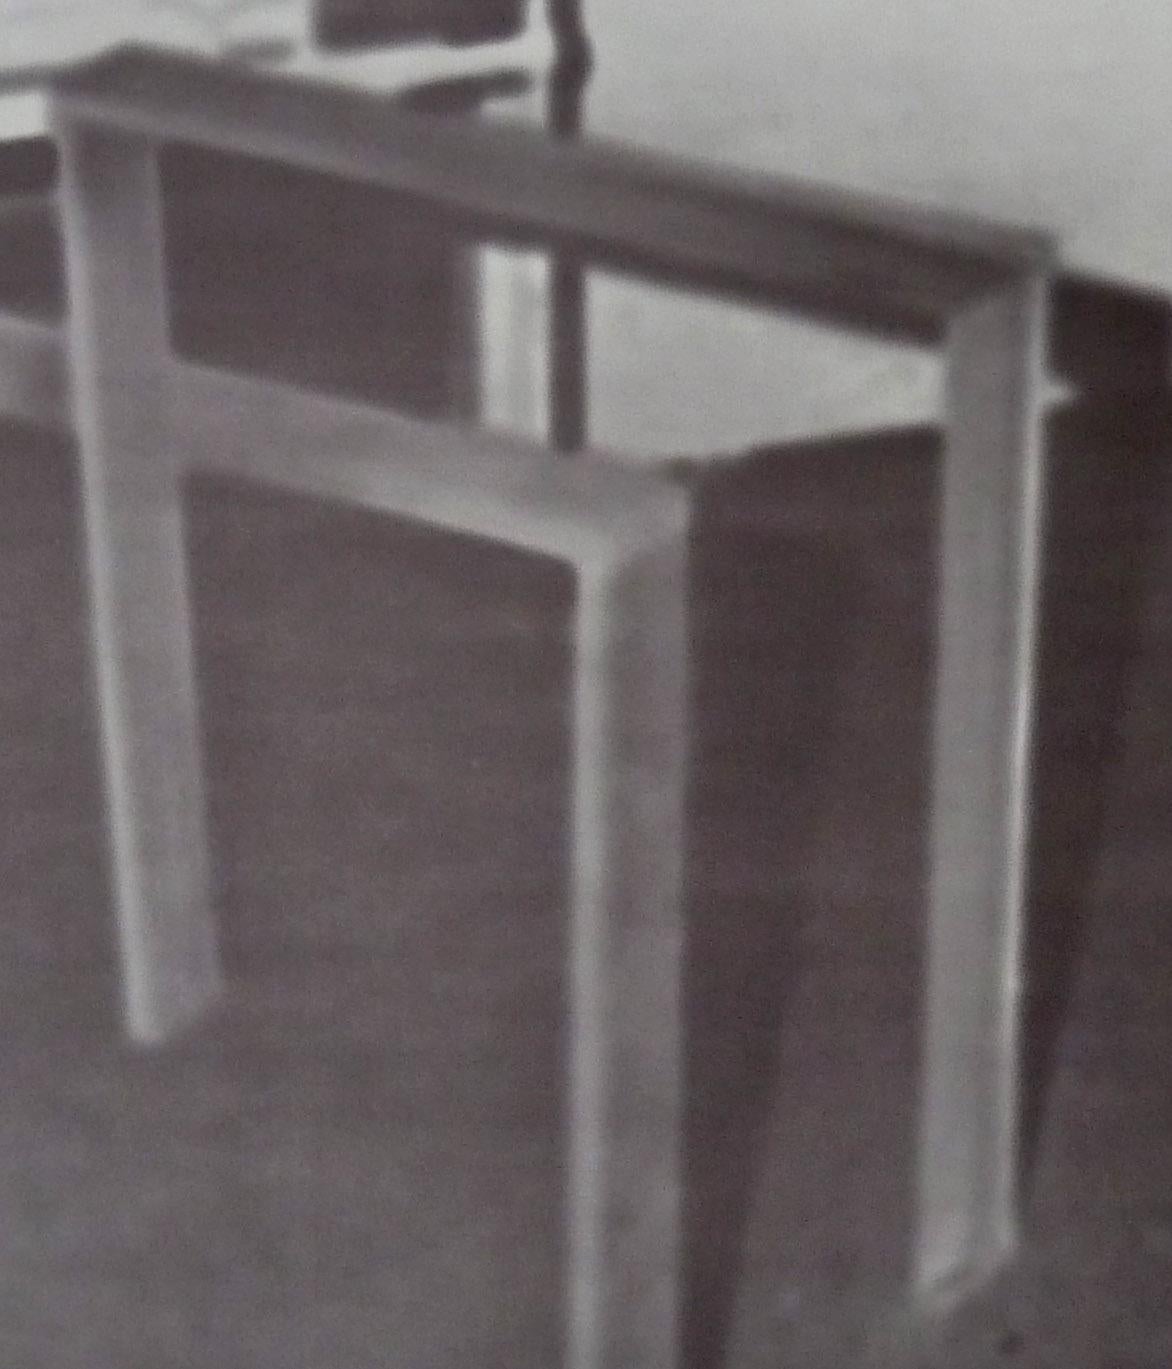 Table Legs, from: Nine Objects - German Realism - Realist Print by Gerhard Richter